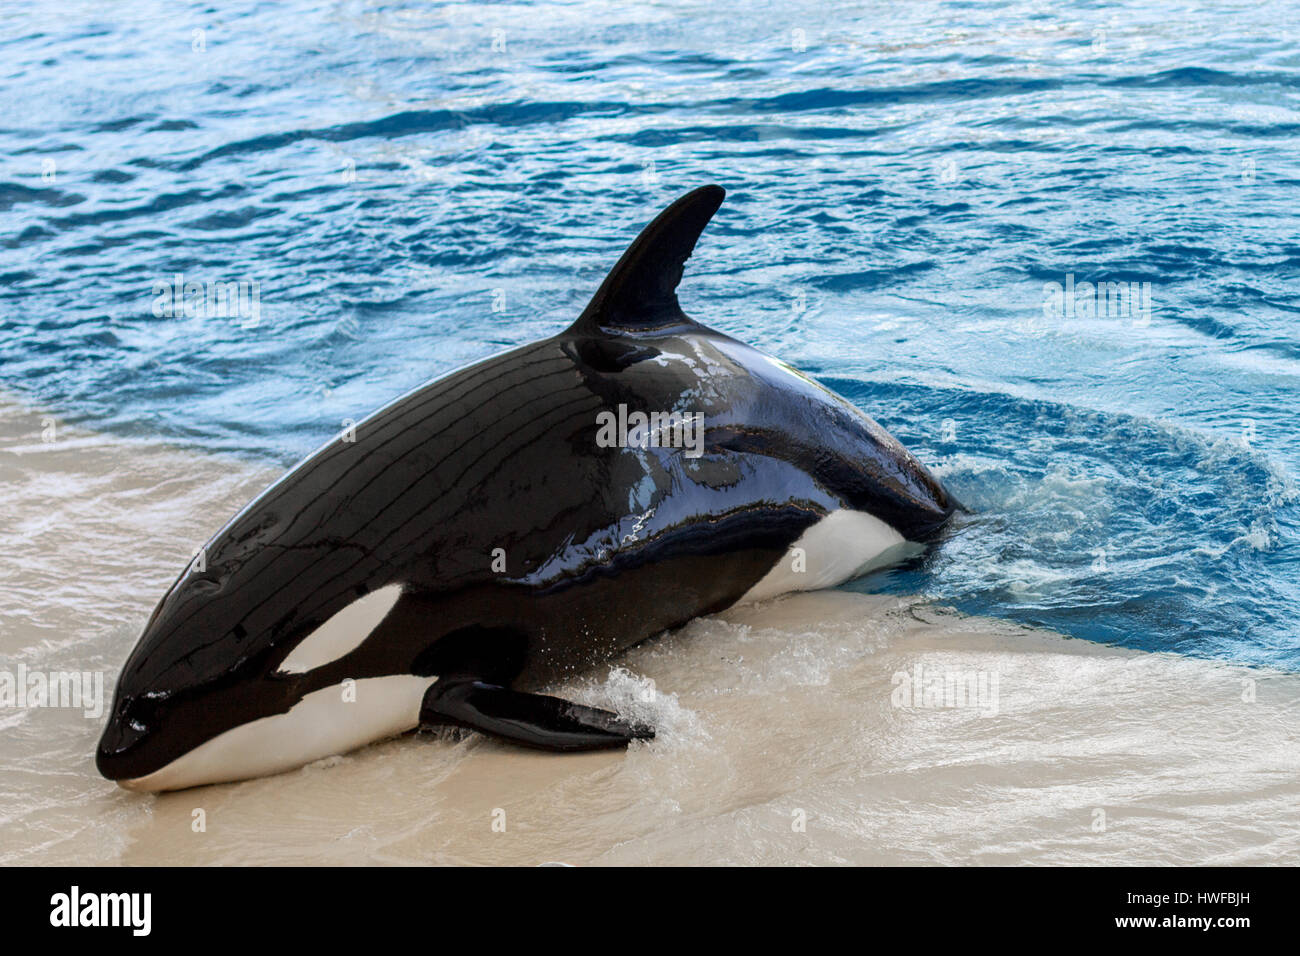 orca whale, killer whale outside pool water Stock Photo